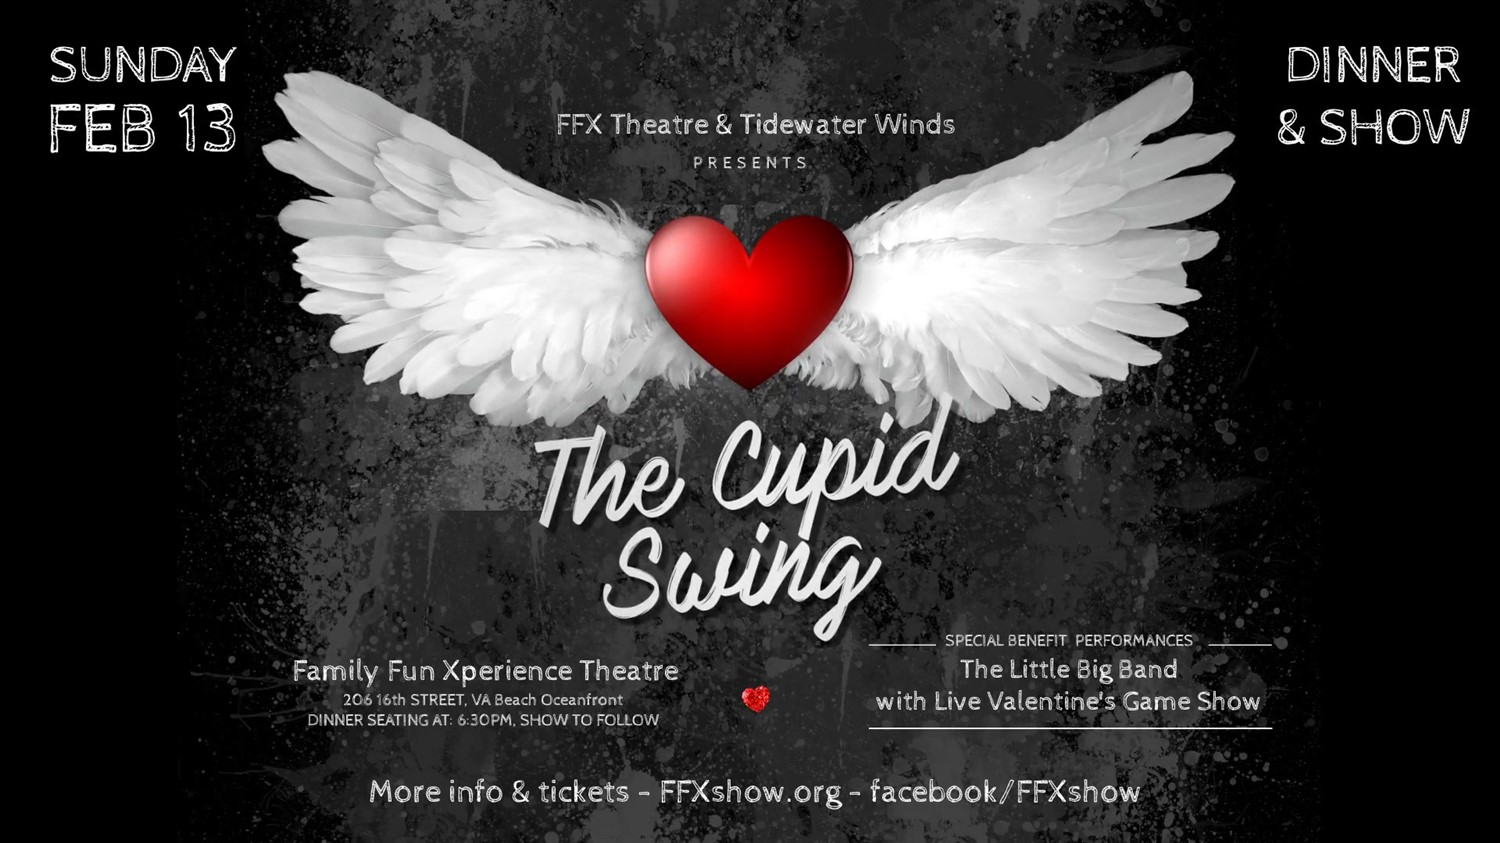 The Cupid Swing Valentine's Dinner Benefit Concert & Game Show on feb. 13, 18:30@FFX Theatre - Buy tickets and Get information on Family Fun Xperience tickets.ffxshow.org